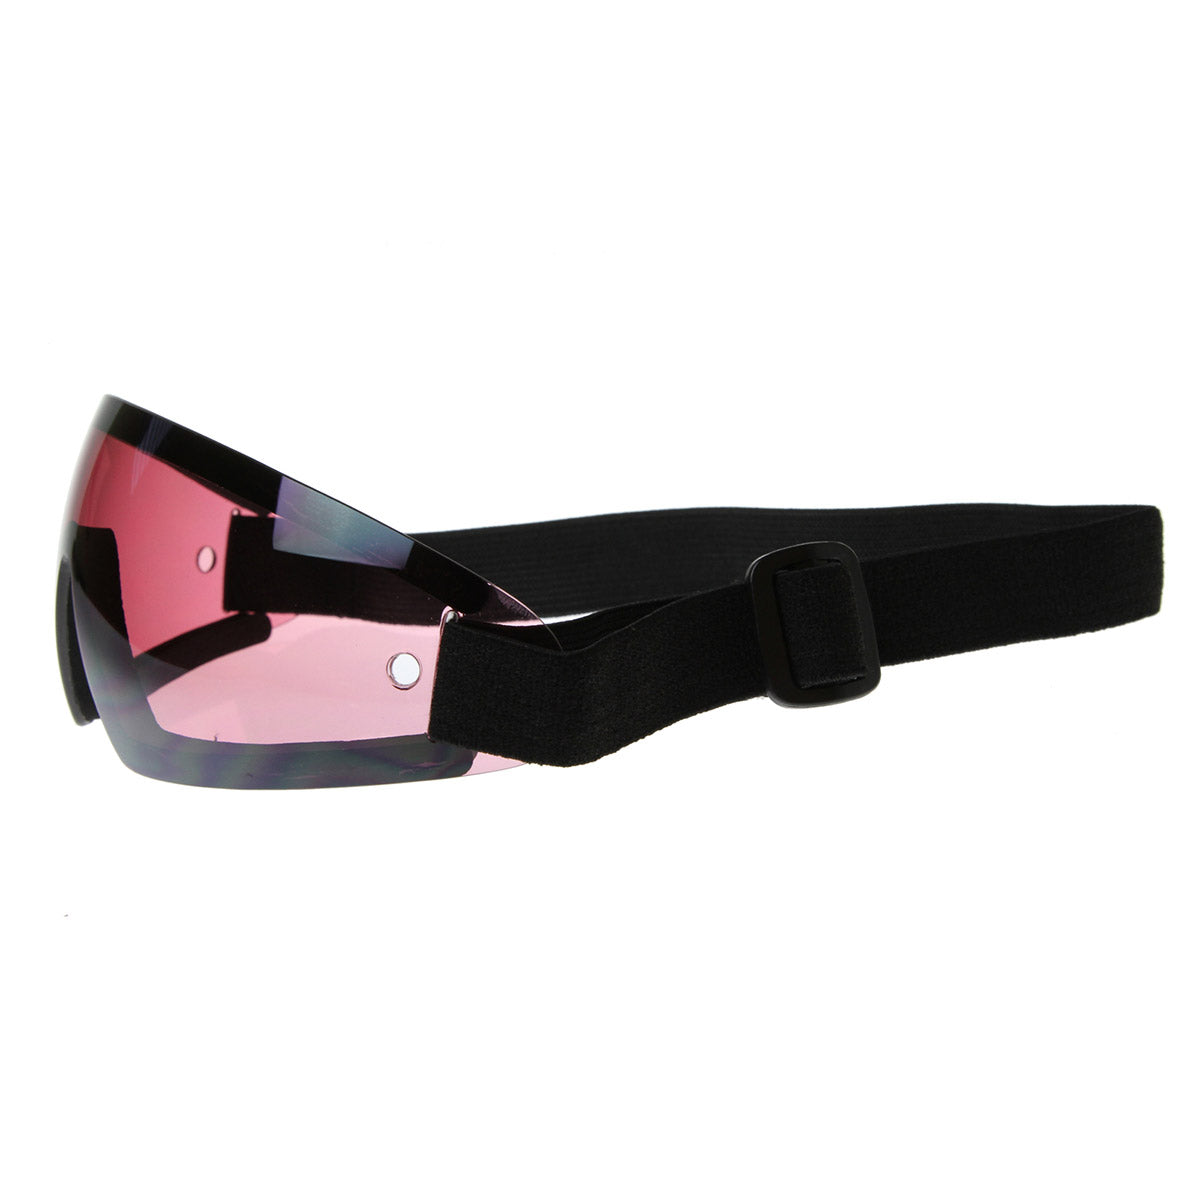 Buy Goggle Inspired Strap starting at USD 15.00